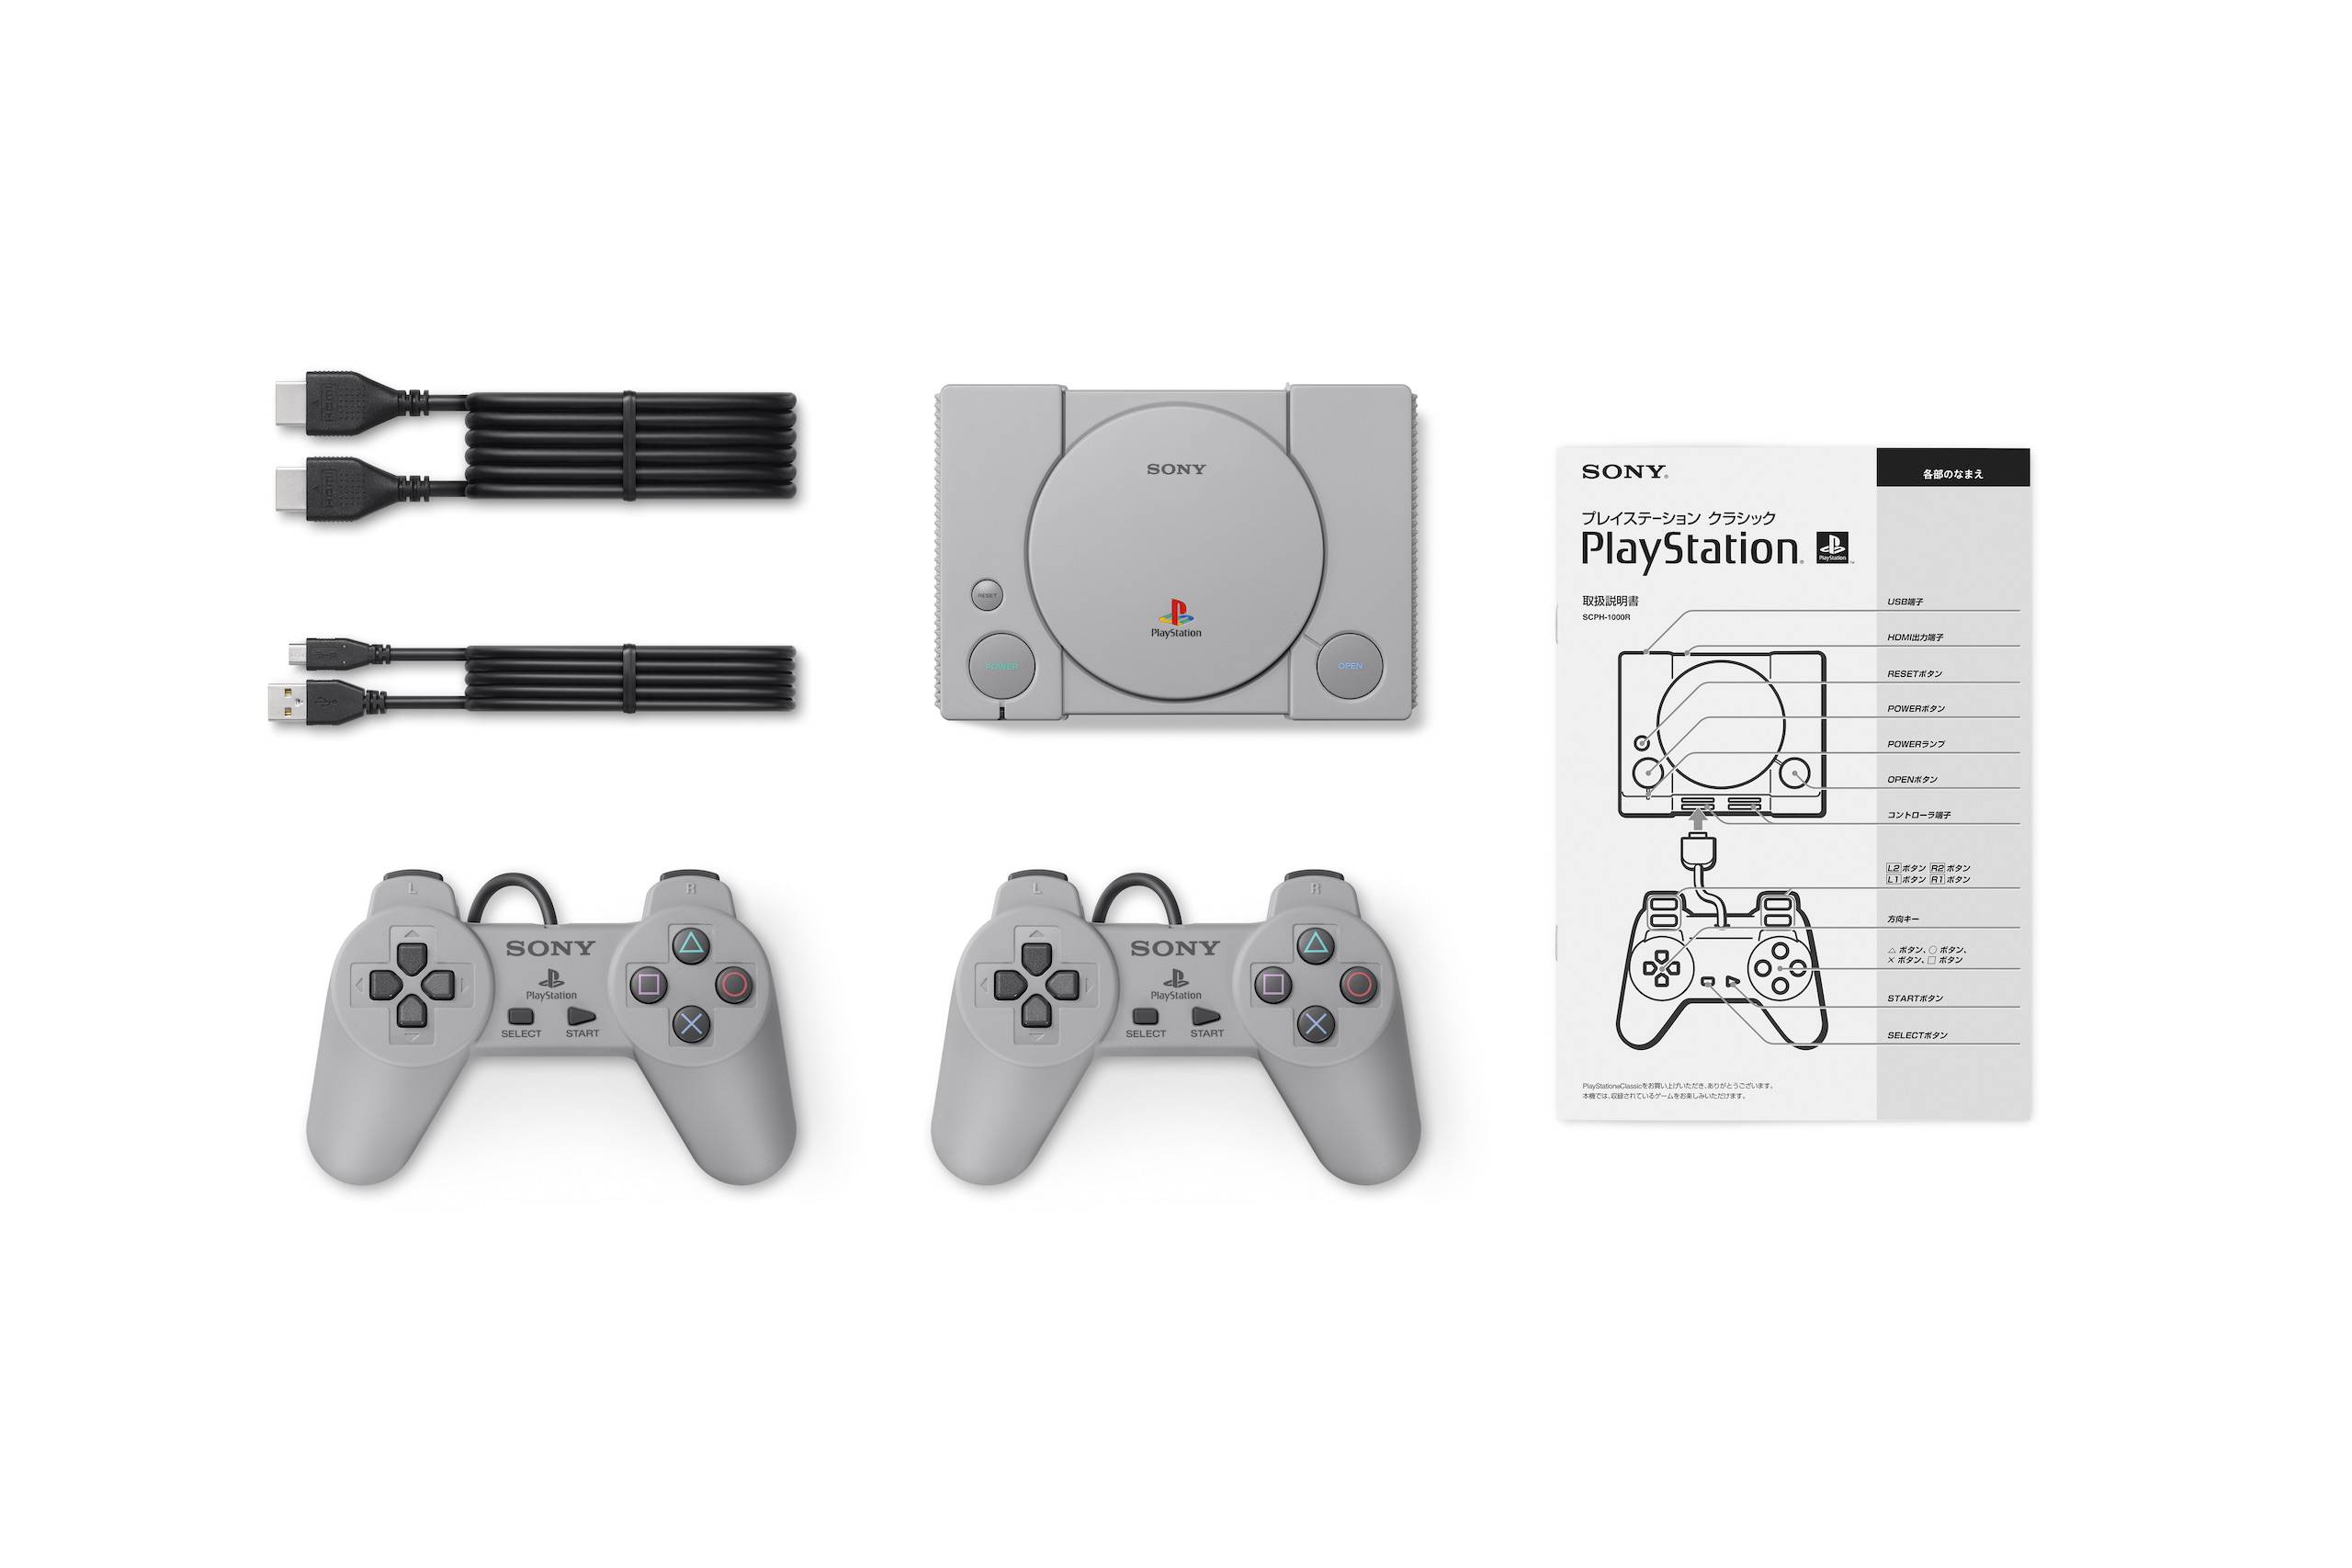 Sony Playstation Classic: Ανακοινώθηκε επίσημα και έρχεται 3 Δεκέμβρη 2